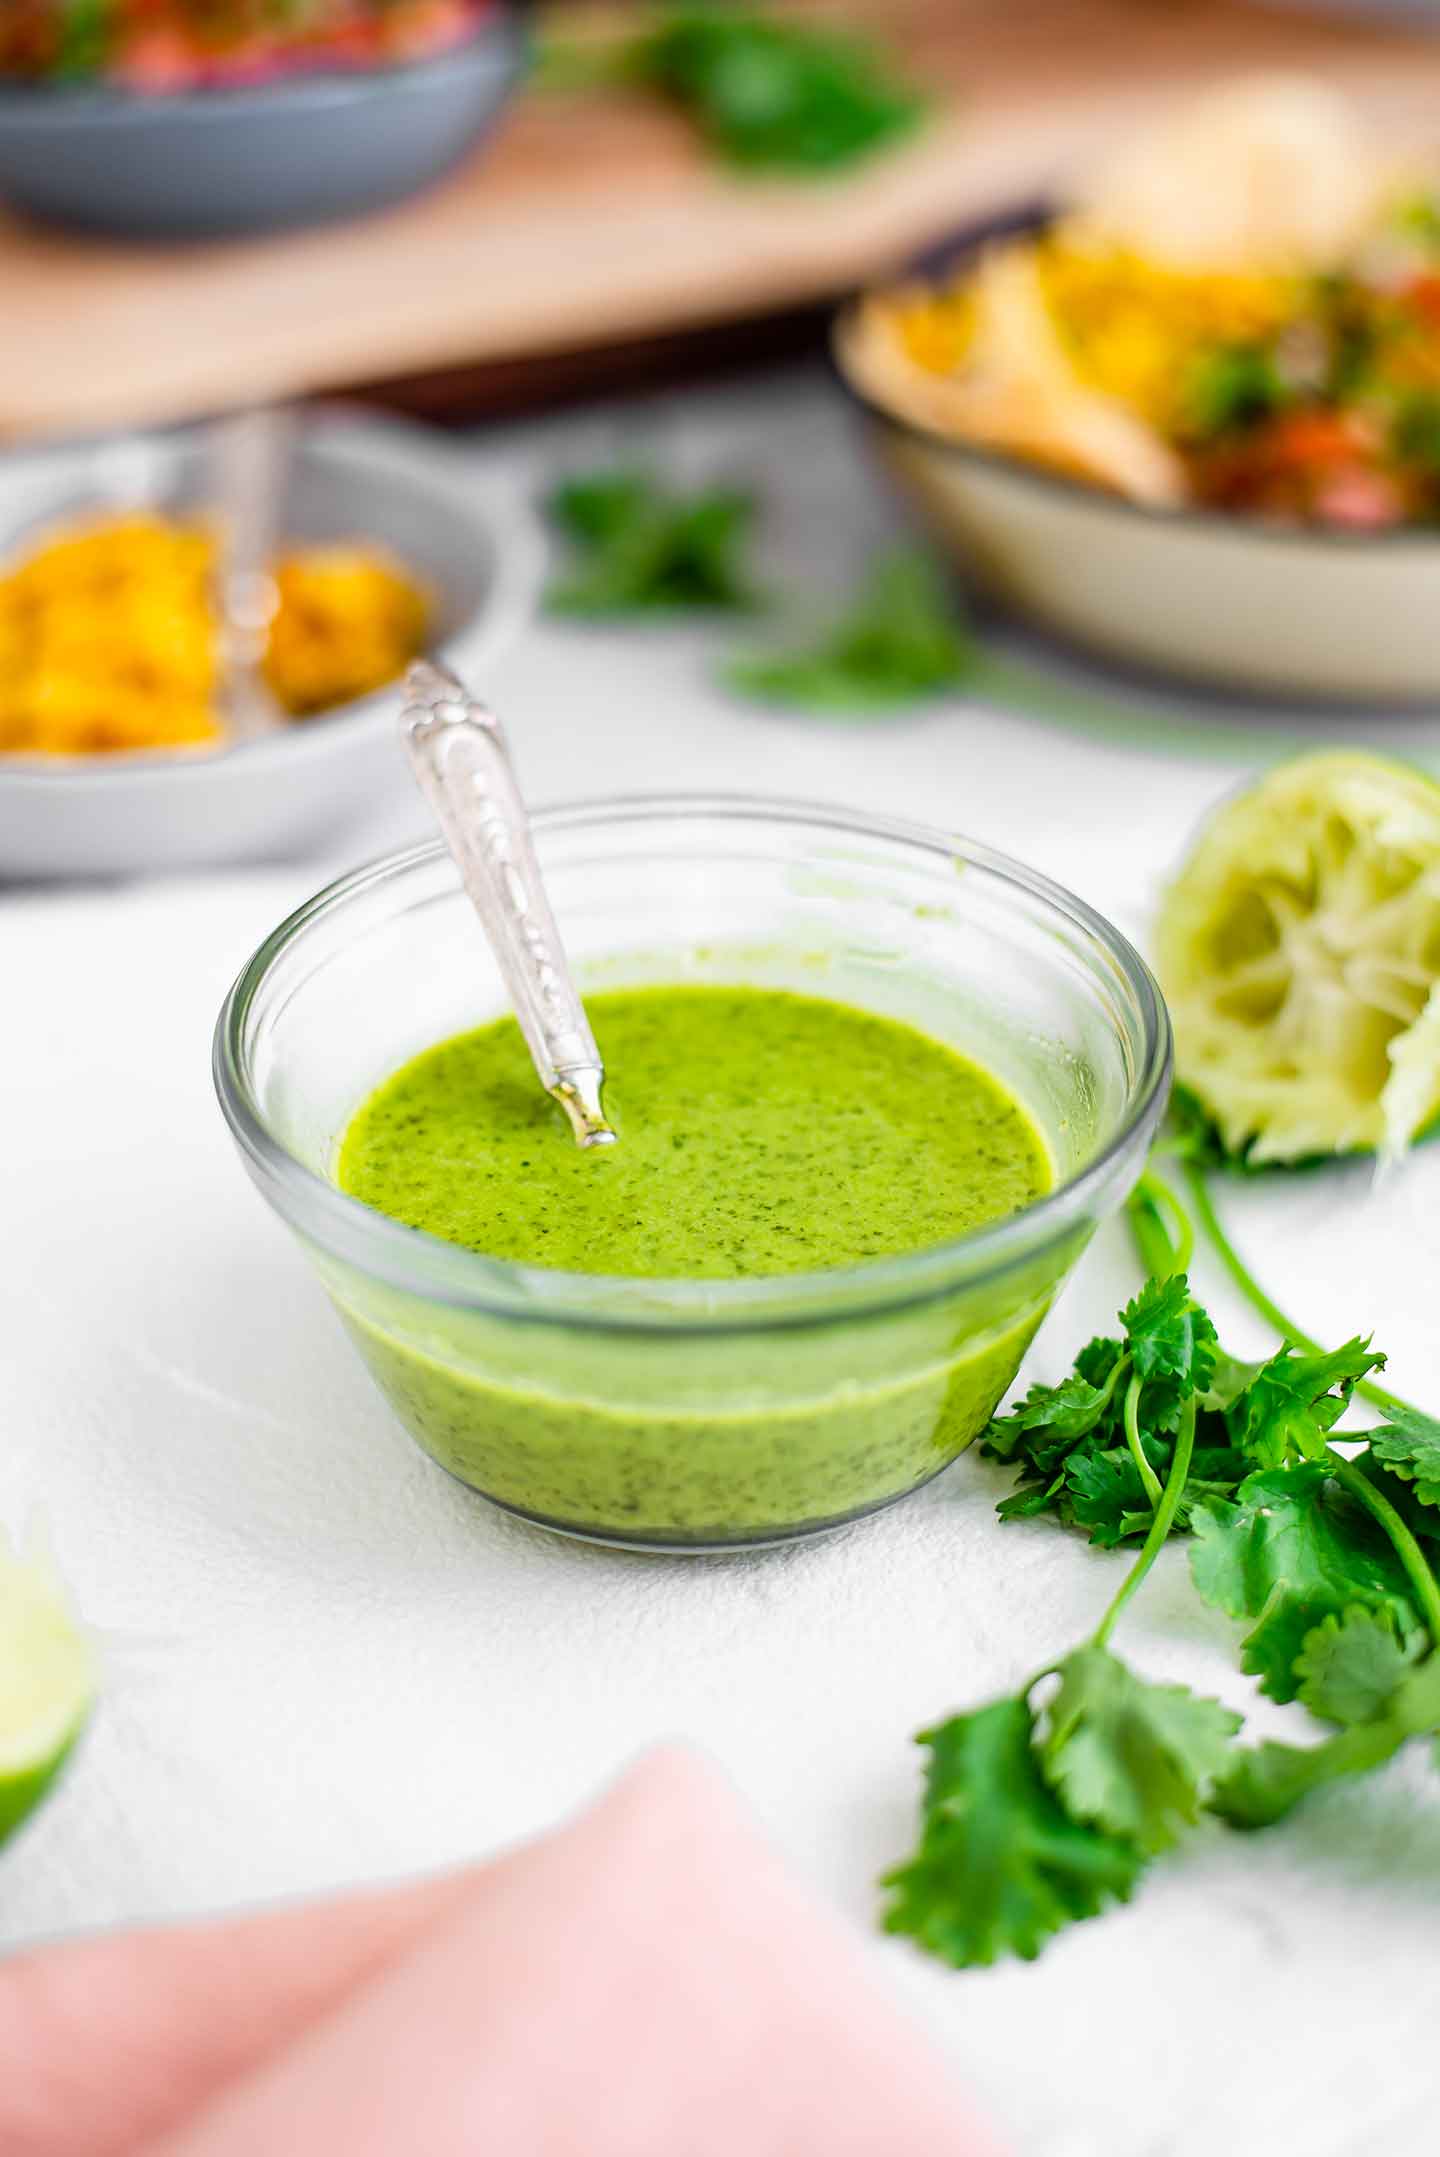 Side view of cilantro lime vinaigrette in a small dish with a spoon. Cilantro leaves and squeezed lime surround the bowl. Salad ingredients can be seen in the background.